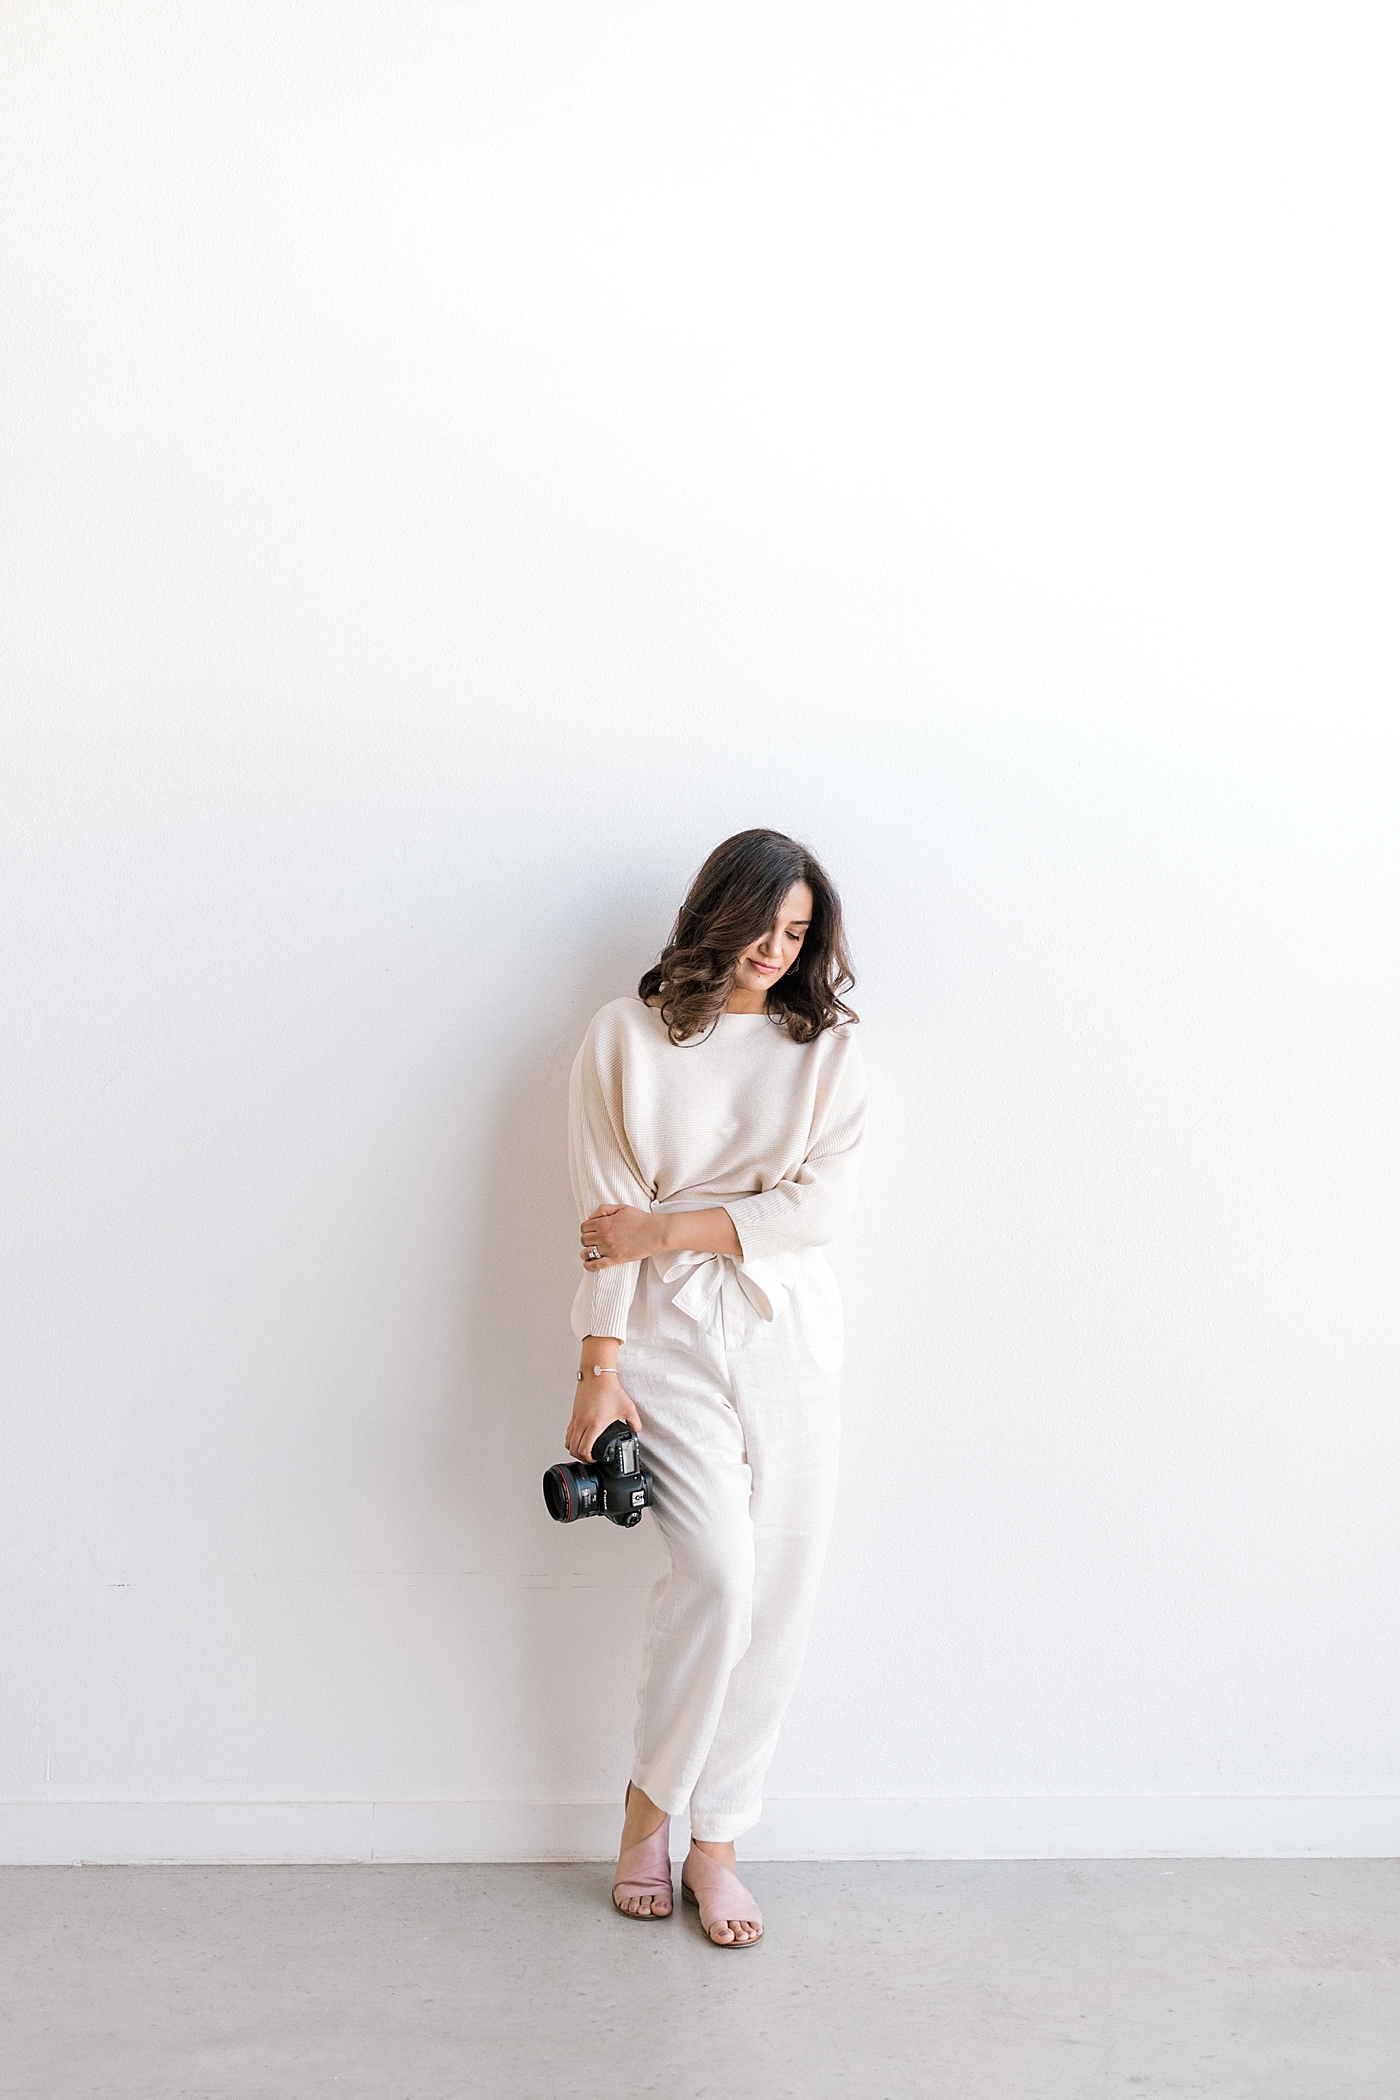 Woman in cream leaning on a wall holding her camera | Full Service Newborn Photographer Sana Ahmed 